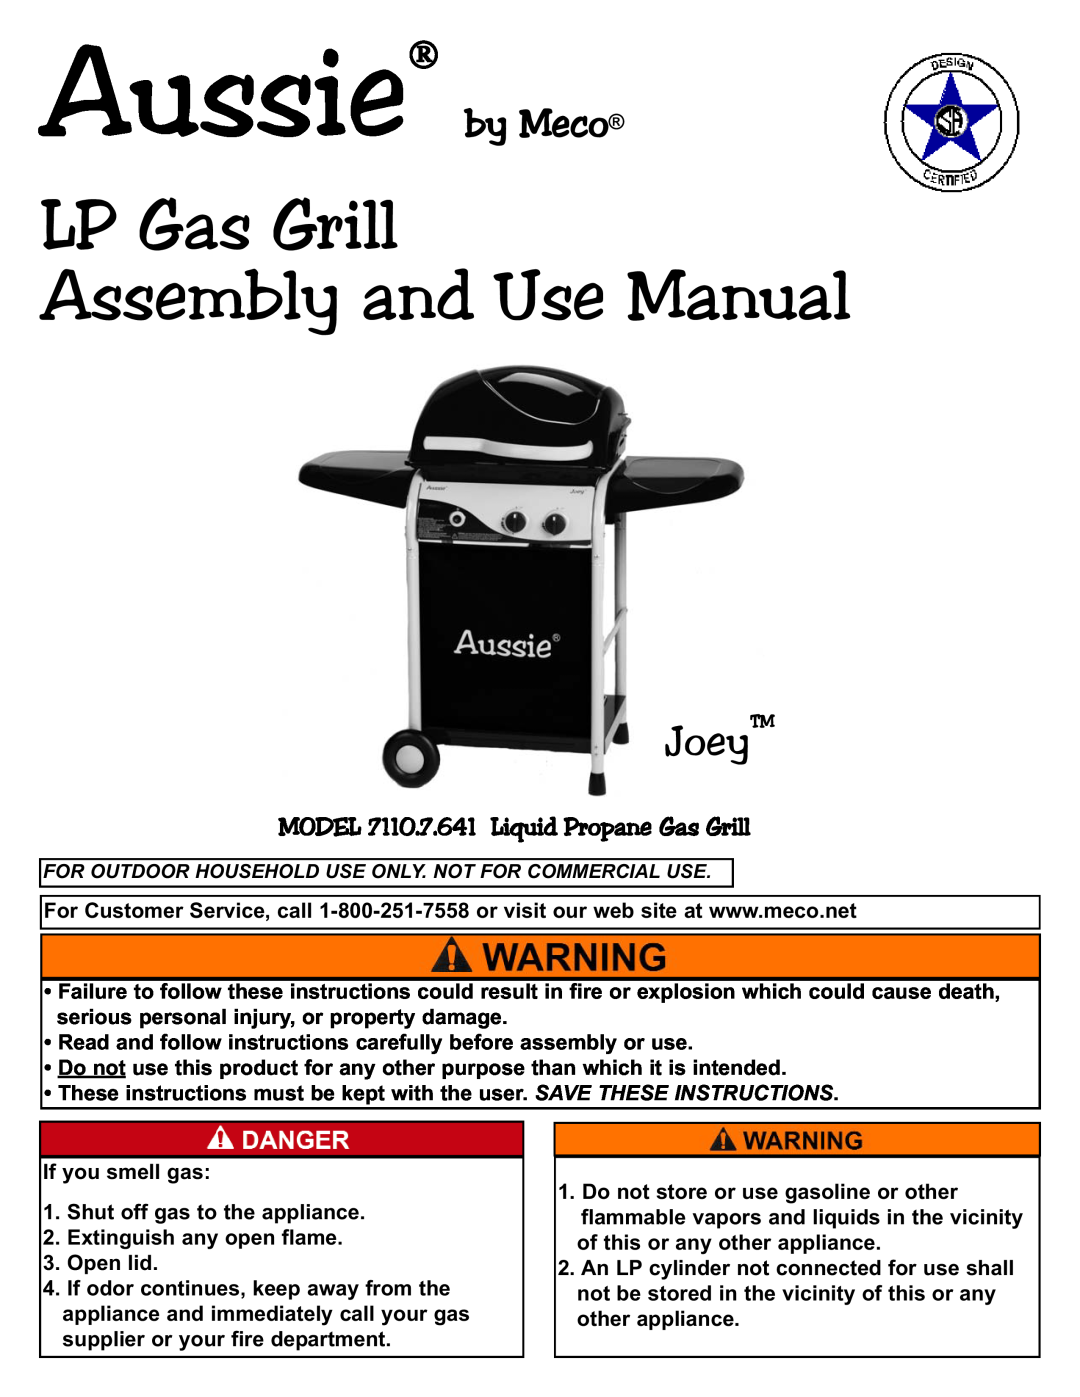 Aussie 7110.7.641 manual LP Gas Grill Assembly and Use Manual, JoeyTM, Aussie by Meco 